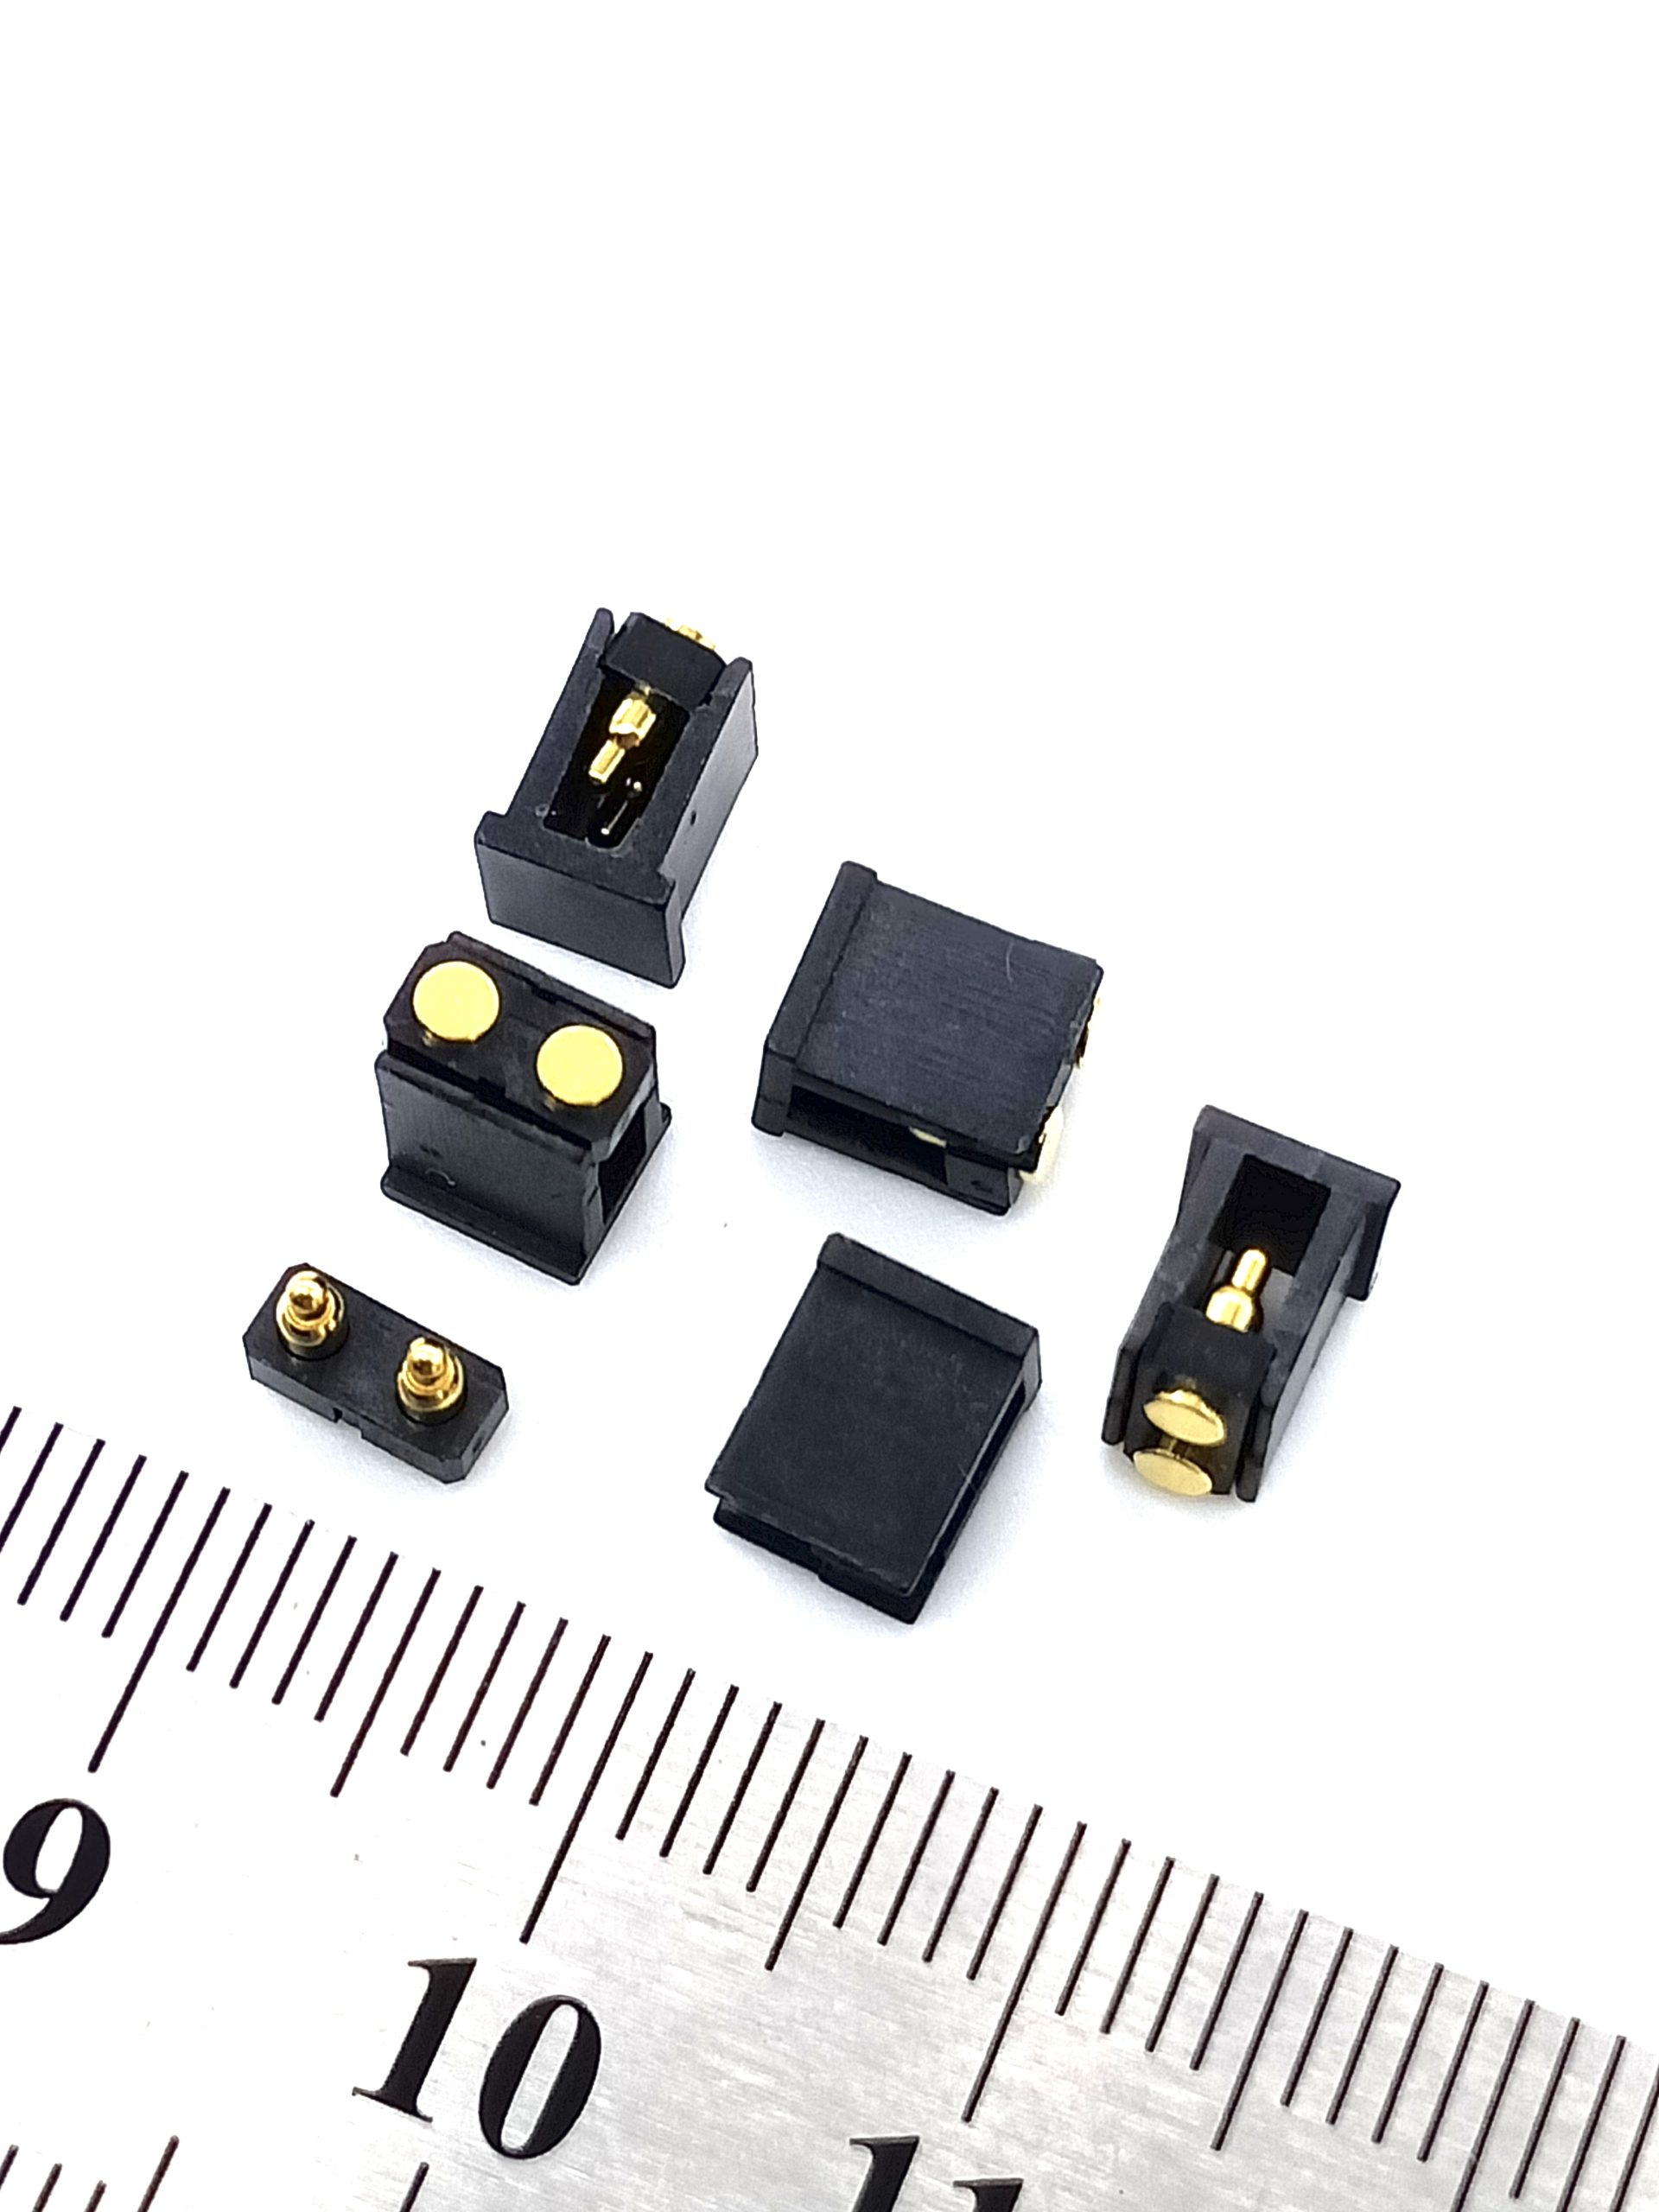 Customize 3mm Pitch Male 2Pin Spring Loaded Pin Pogo Pin Header